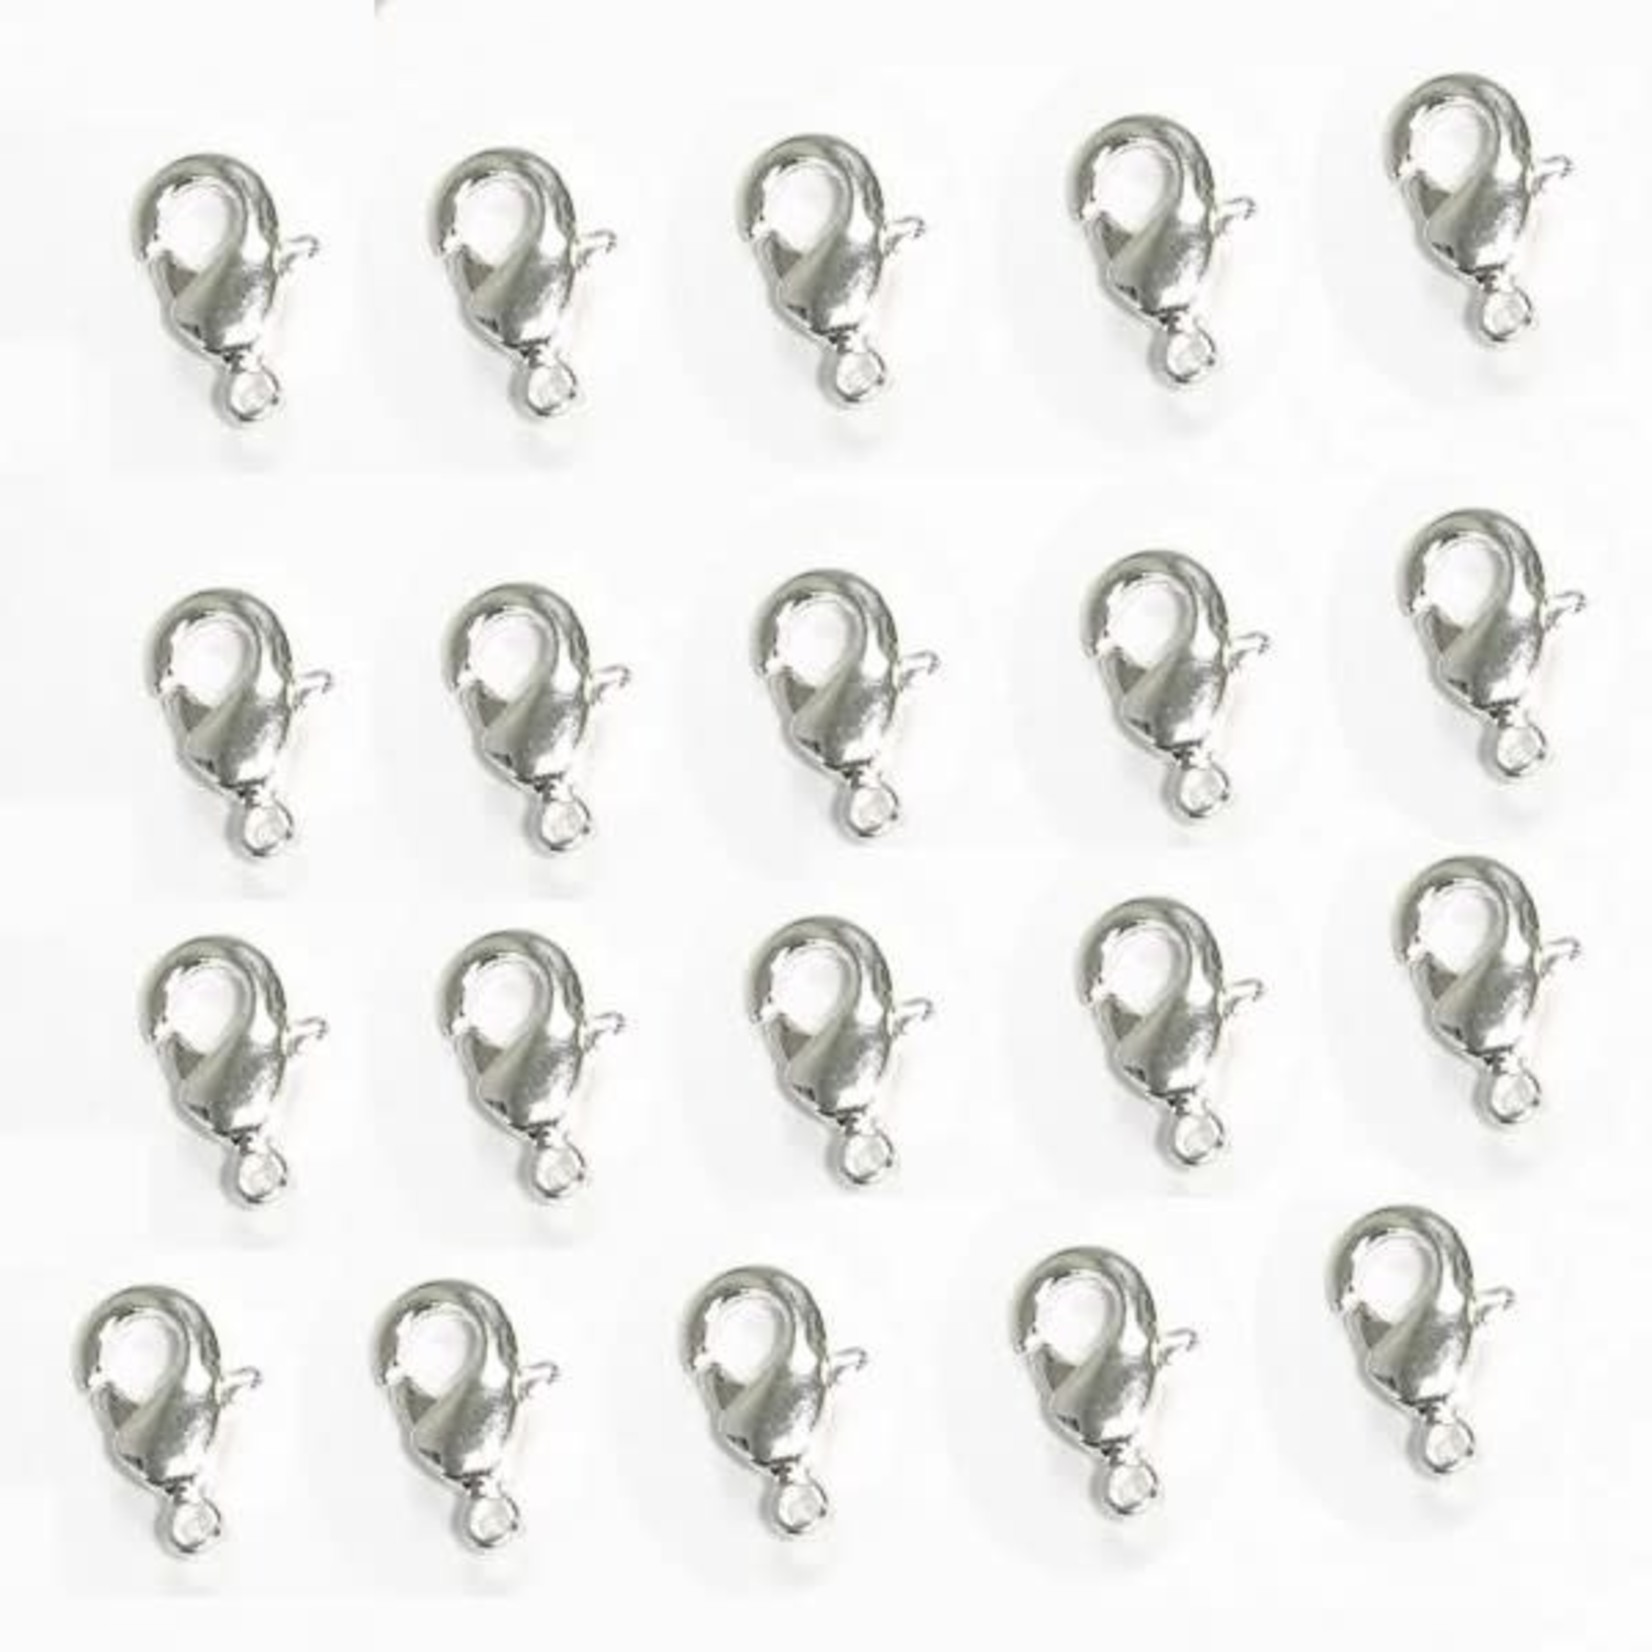 Silver Plated Lobster Clasp 12x7mm Nickel-Free - 20 pieces